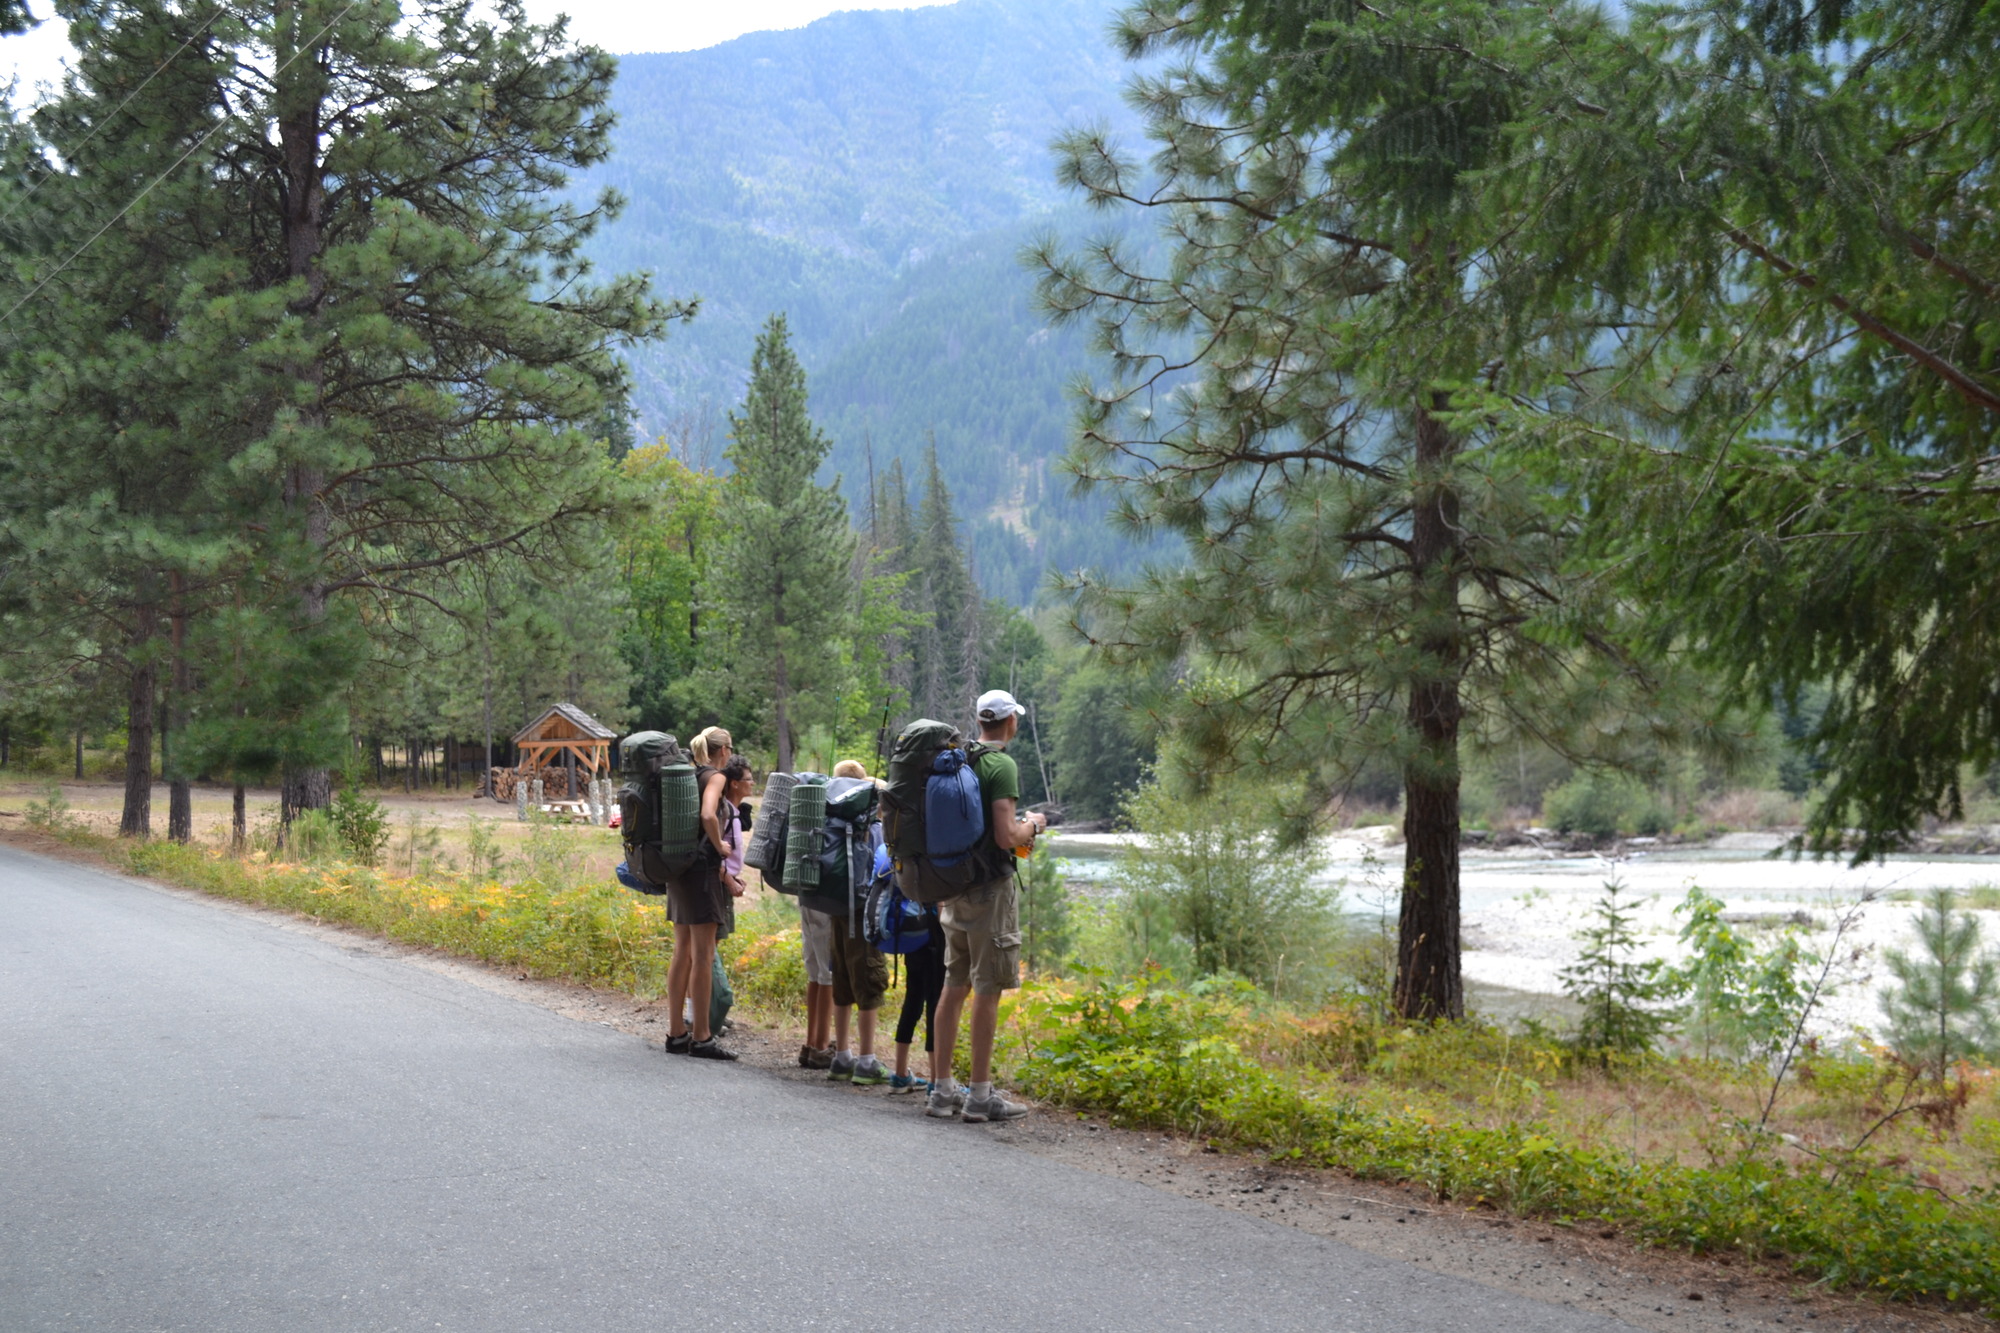 A family of four wearing large backpacks pause alongside a forested road looking at a river.